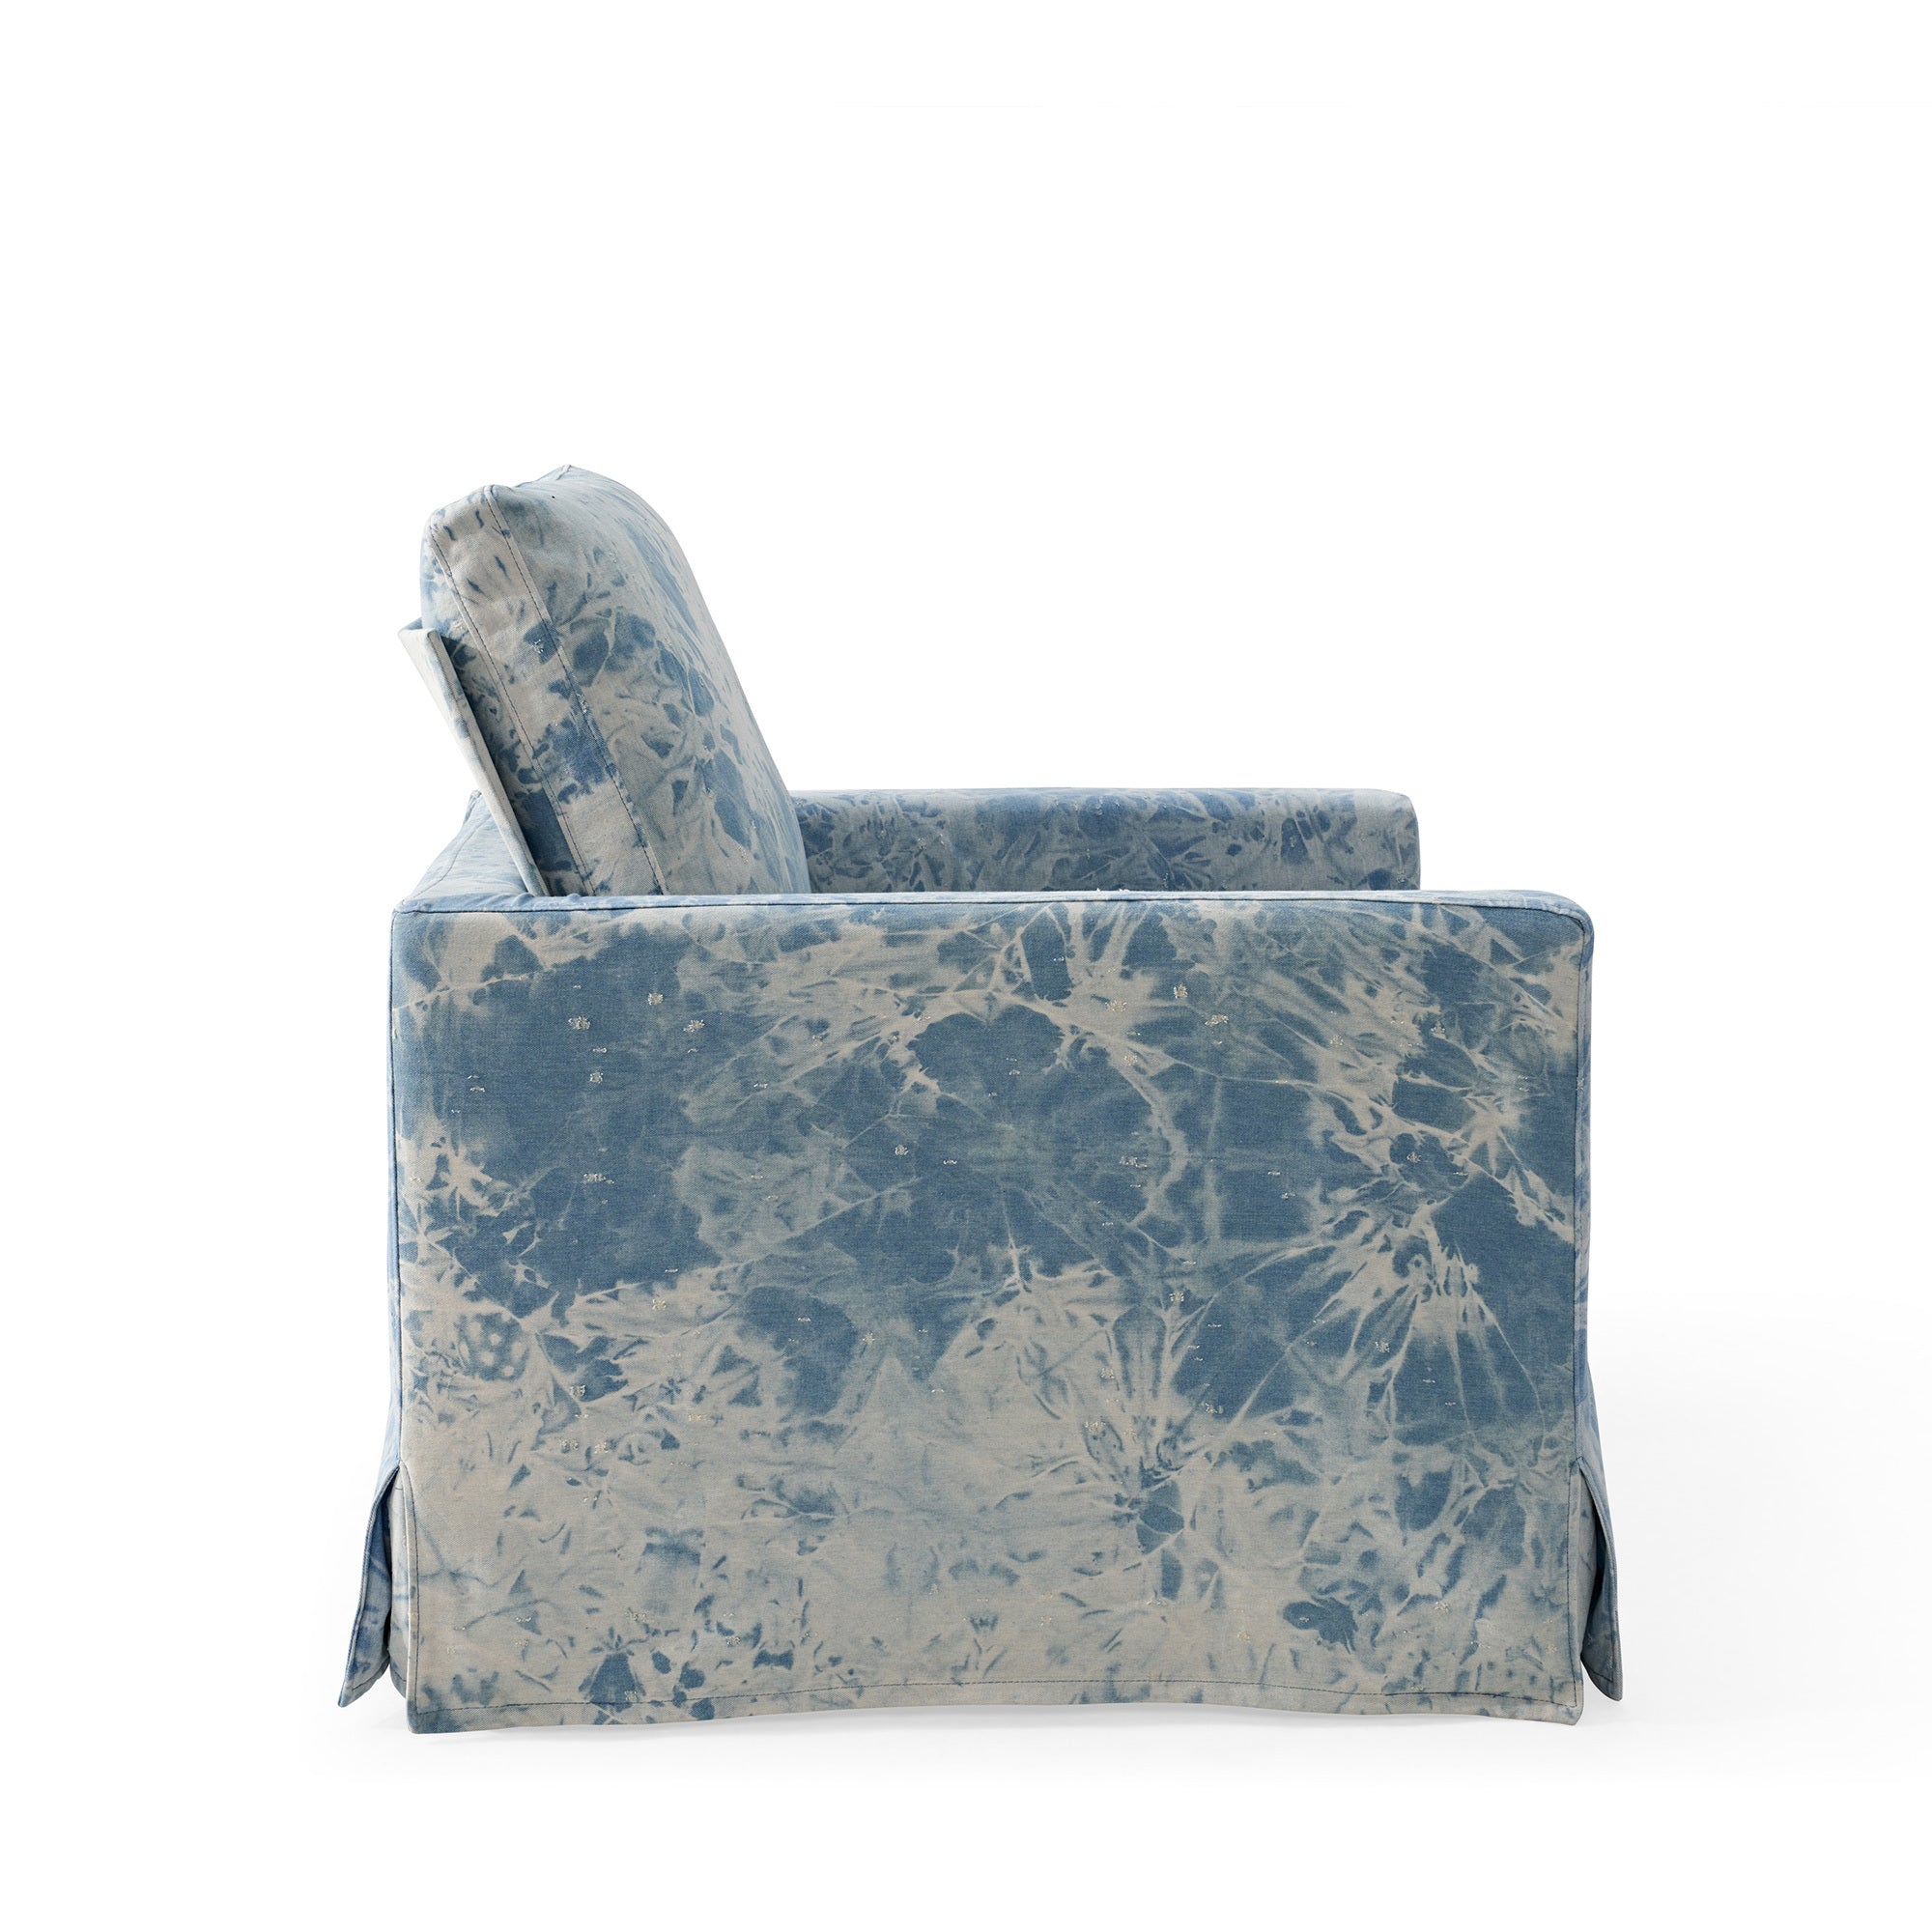 Swivel Chair with Loose Cover, Denim Fabric,Solid blue+grey-primary living